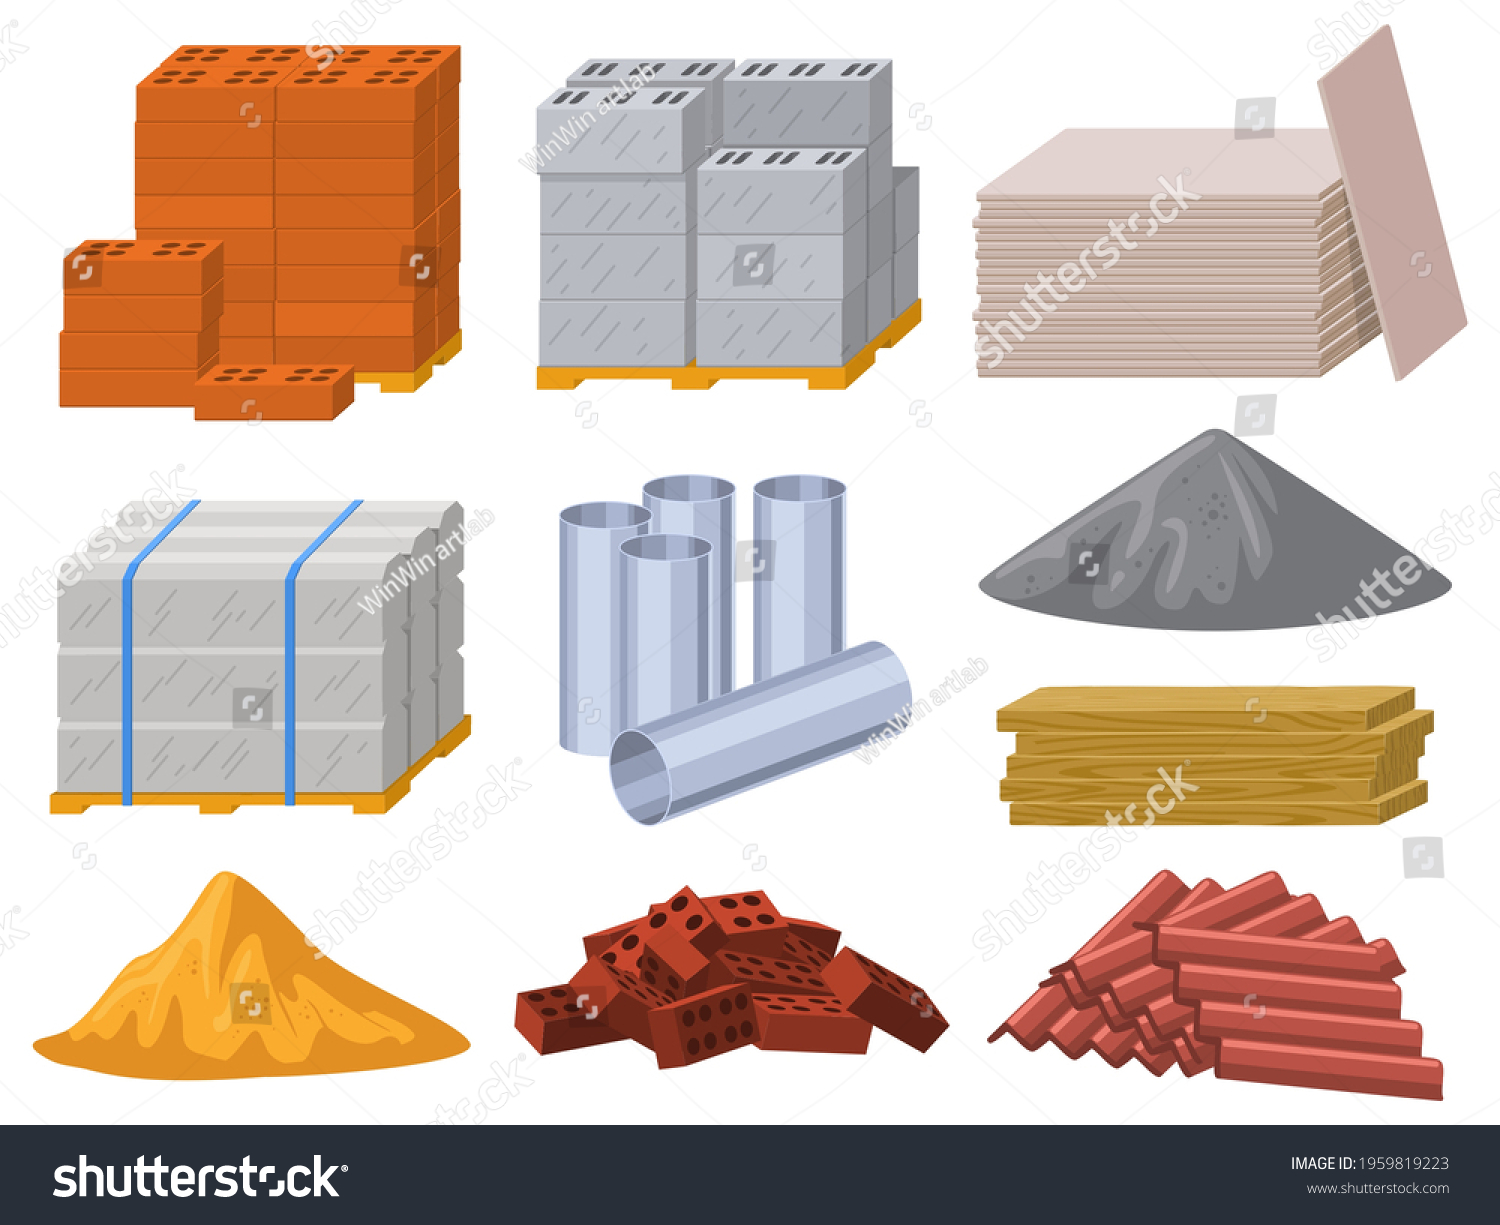 Building materials. Construction industry bricks, cement, wooden planks and metal pipes vector illustration set. Building insulation roofing material. Construction wooden material, block to building #1959819223